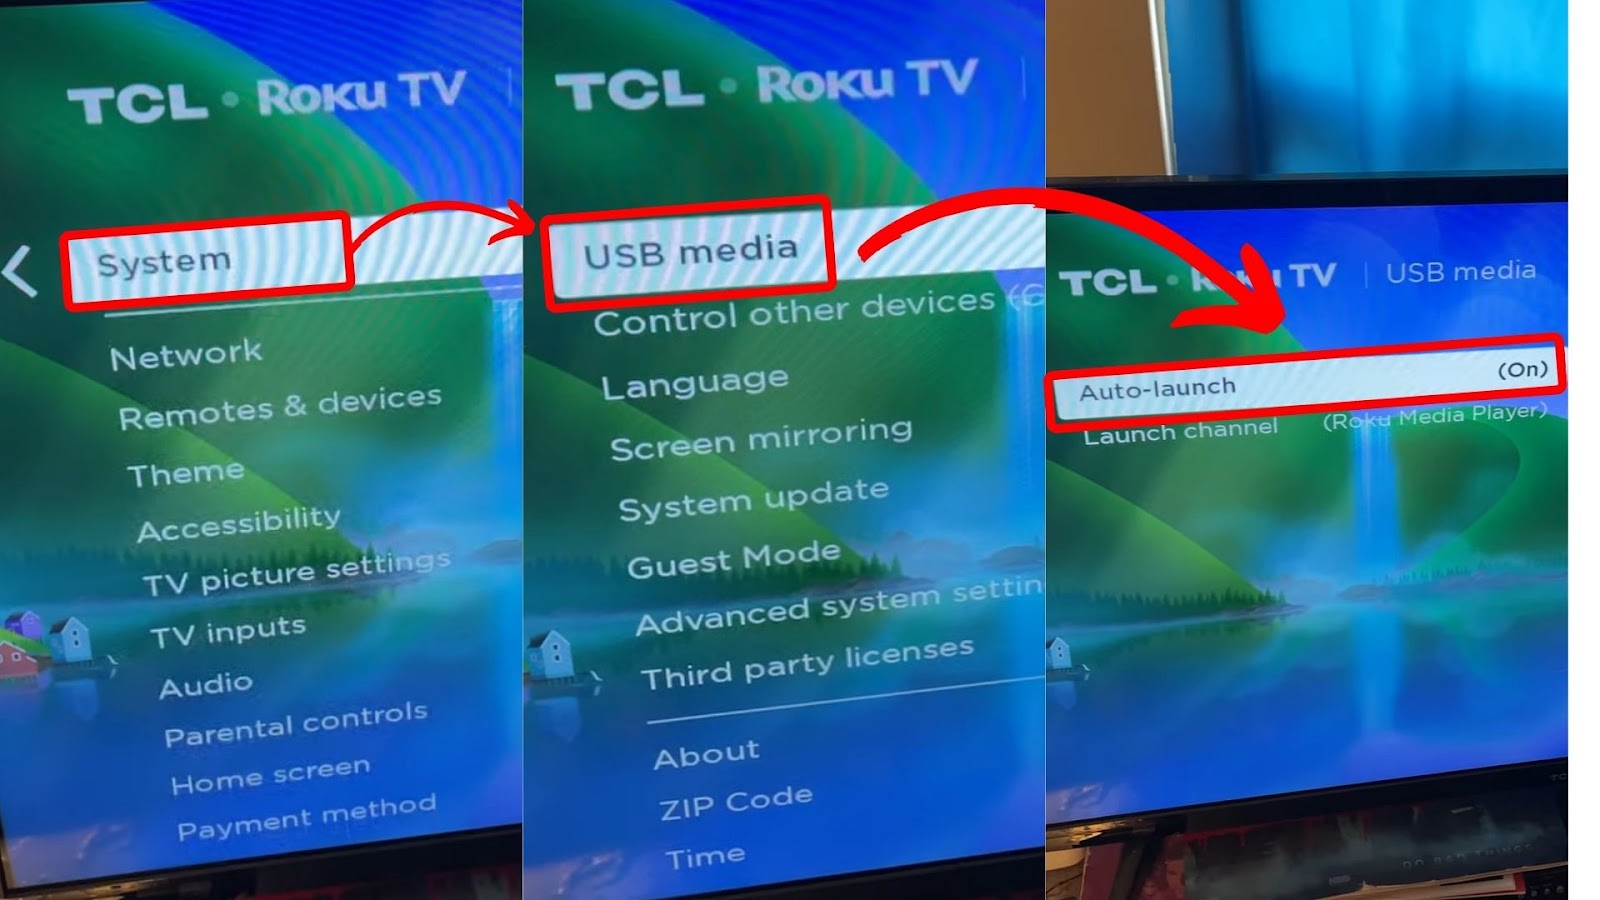 How to Turn on USB Auto-launch on TCL Roku TV